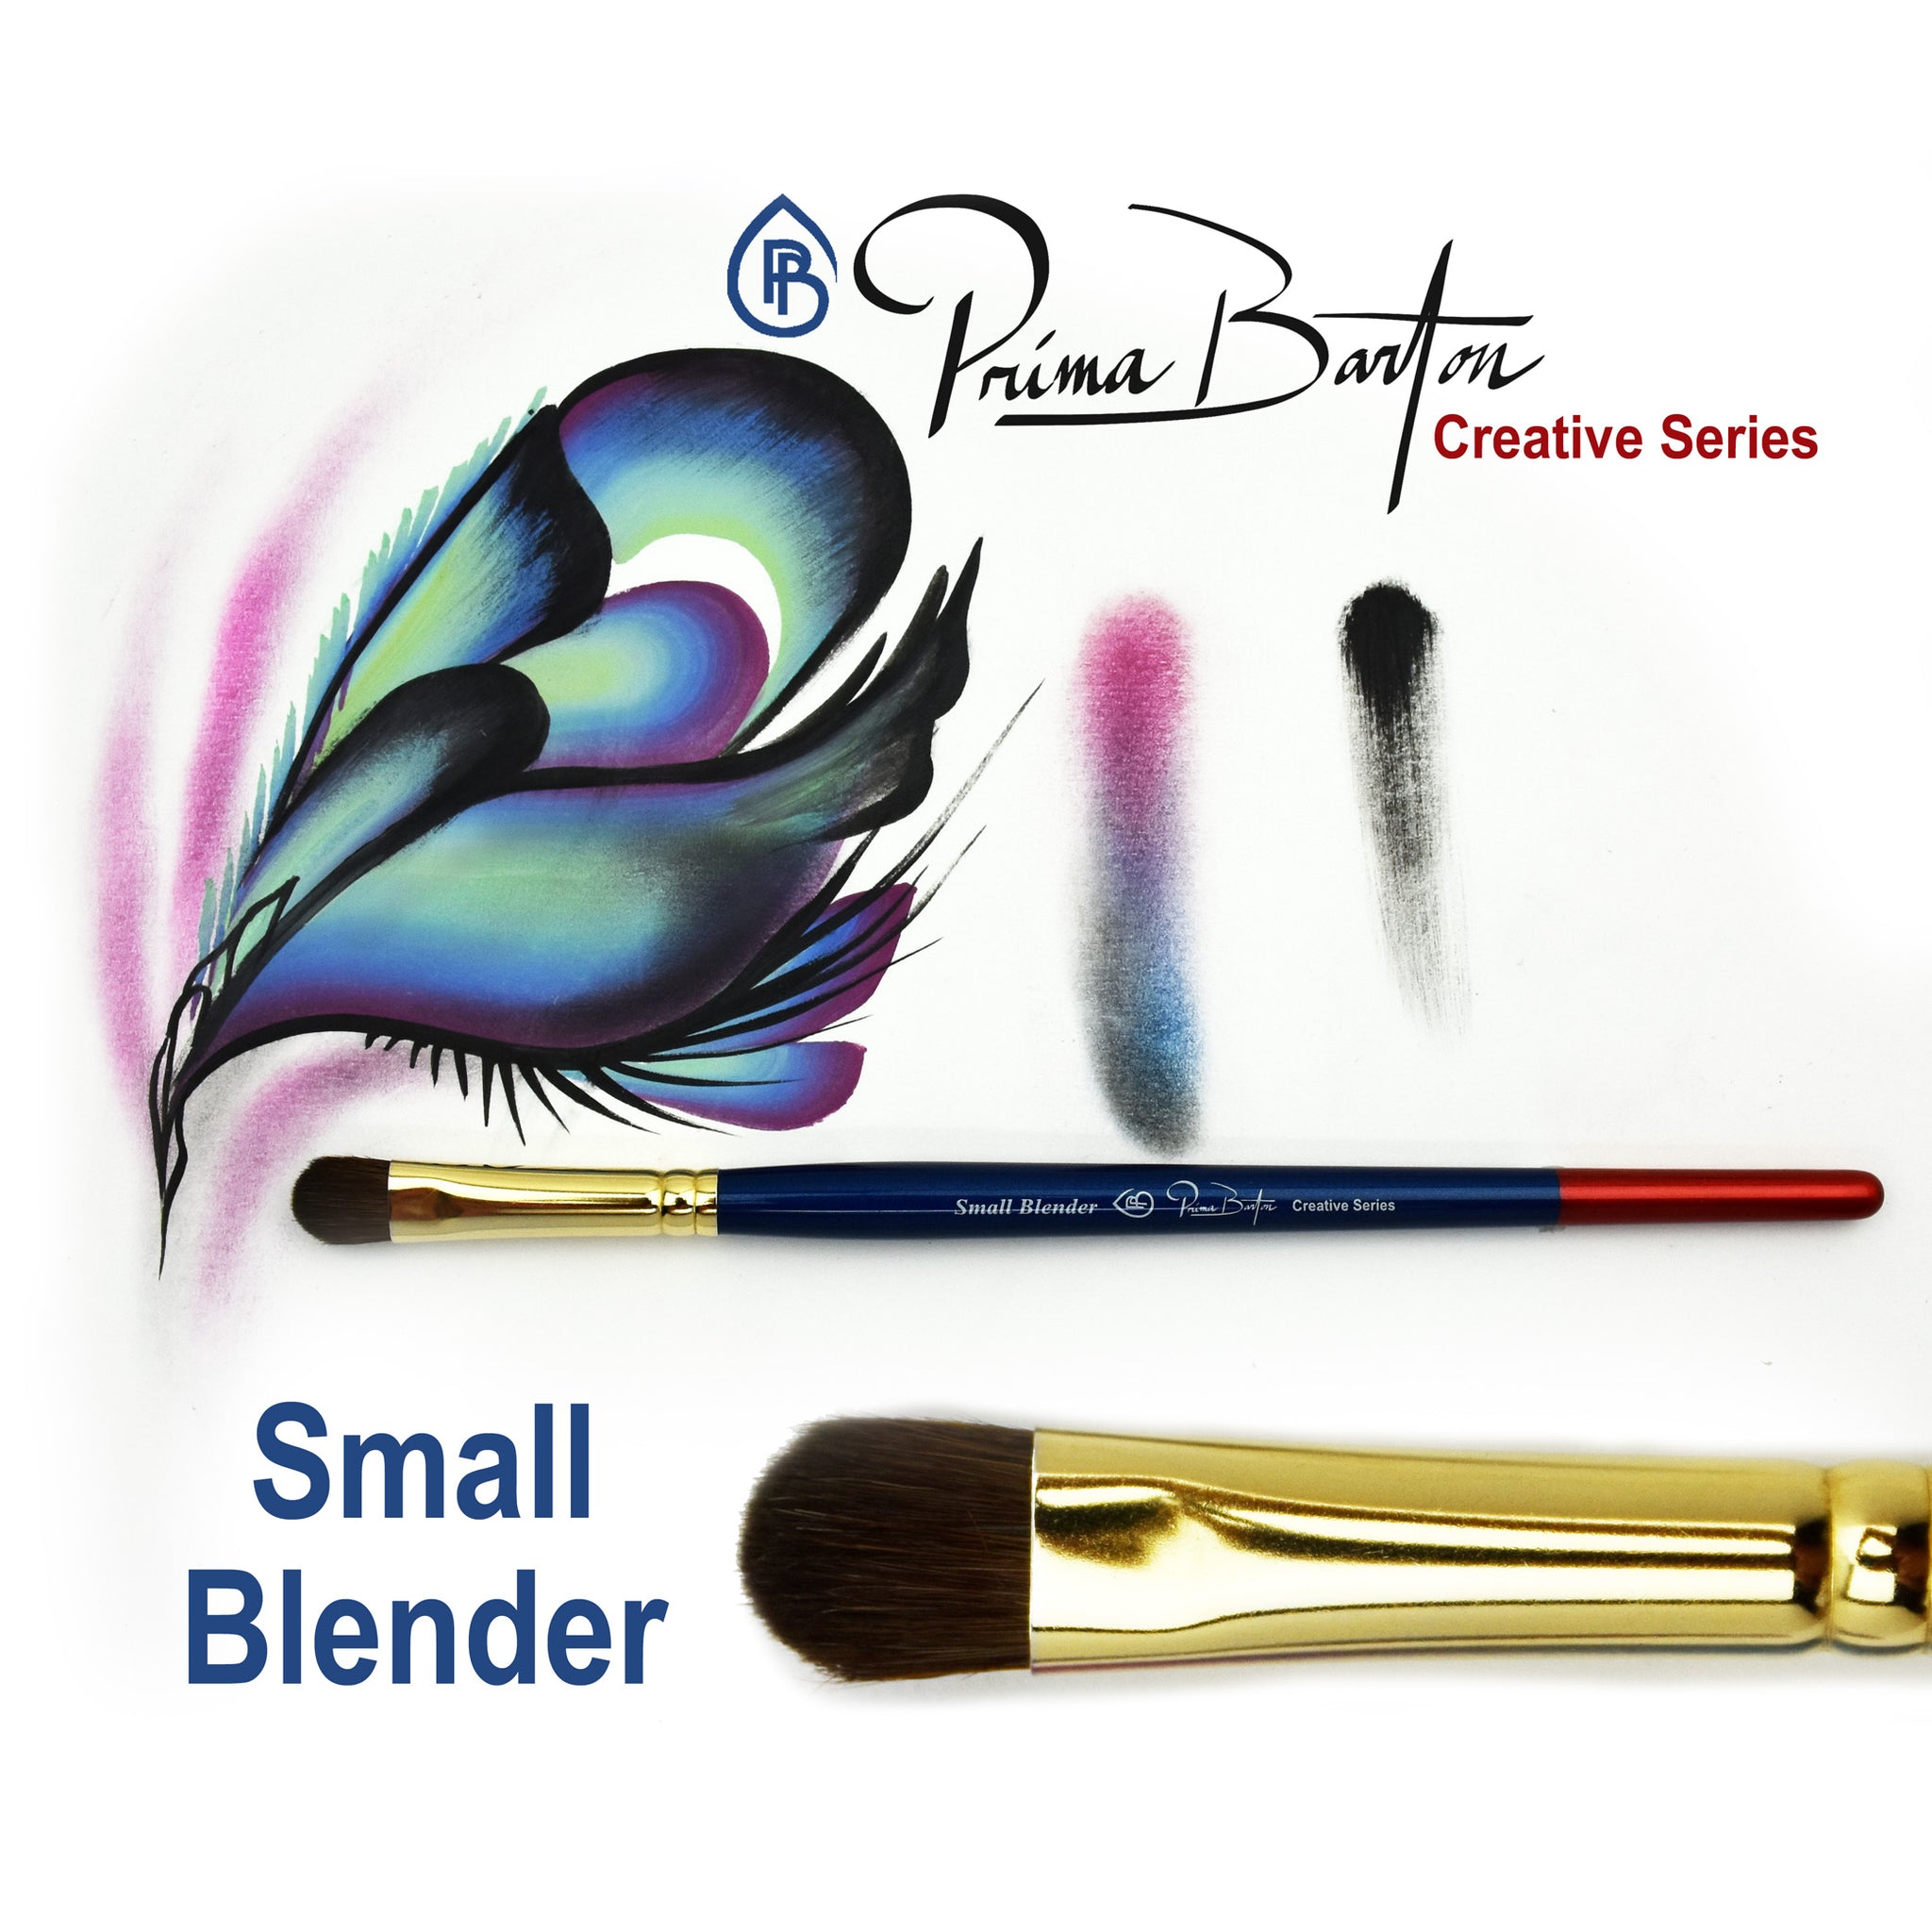 Prima Barton Brushes<br />Blender Small - Looney Bin Products 